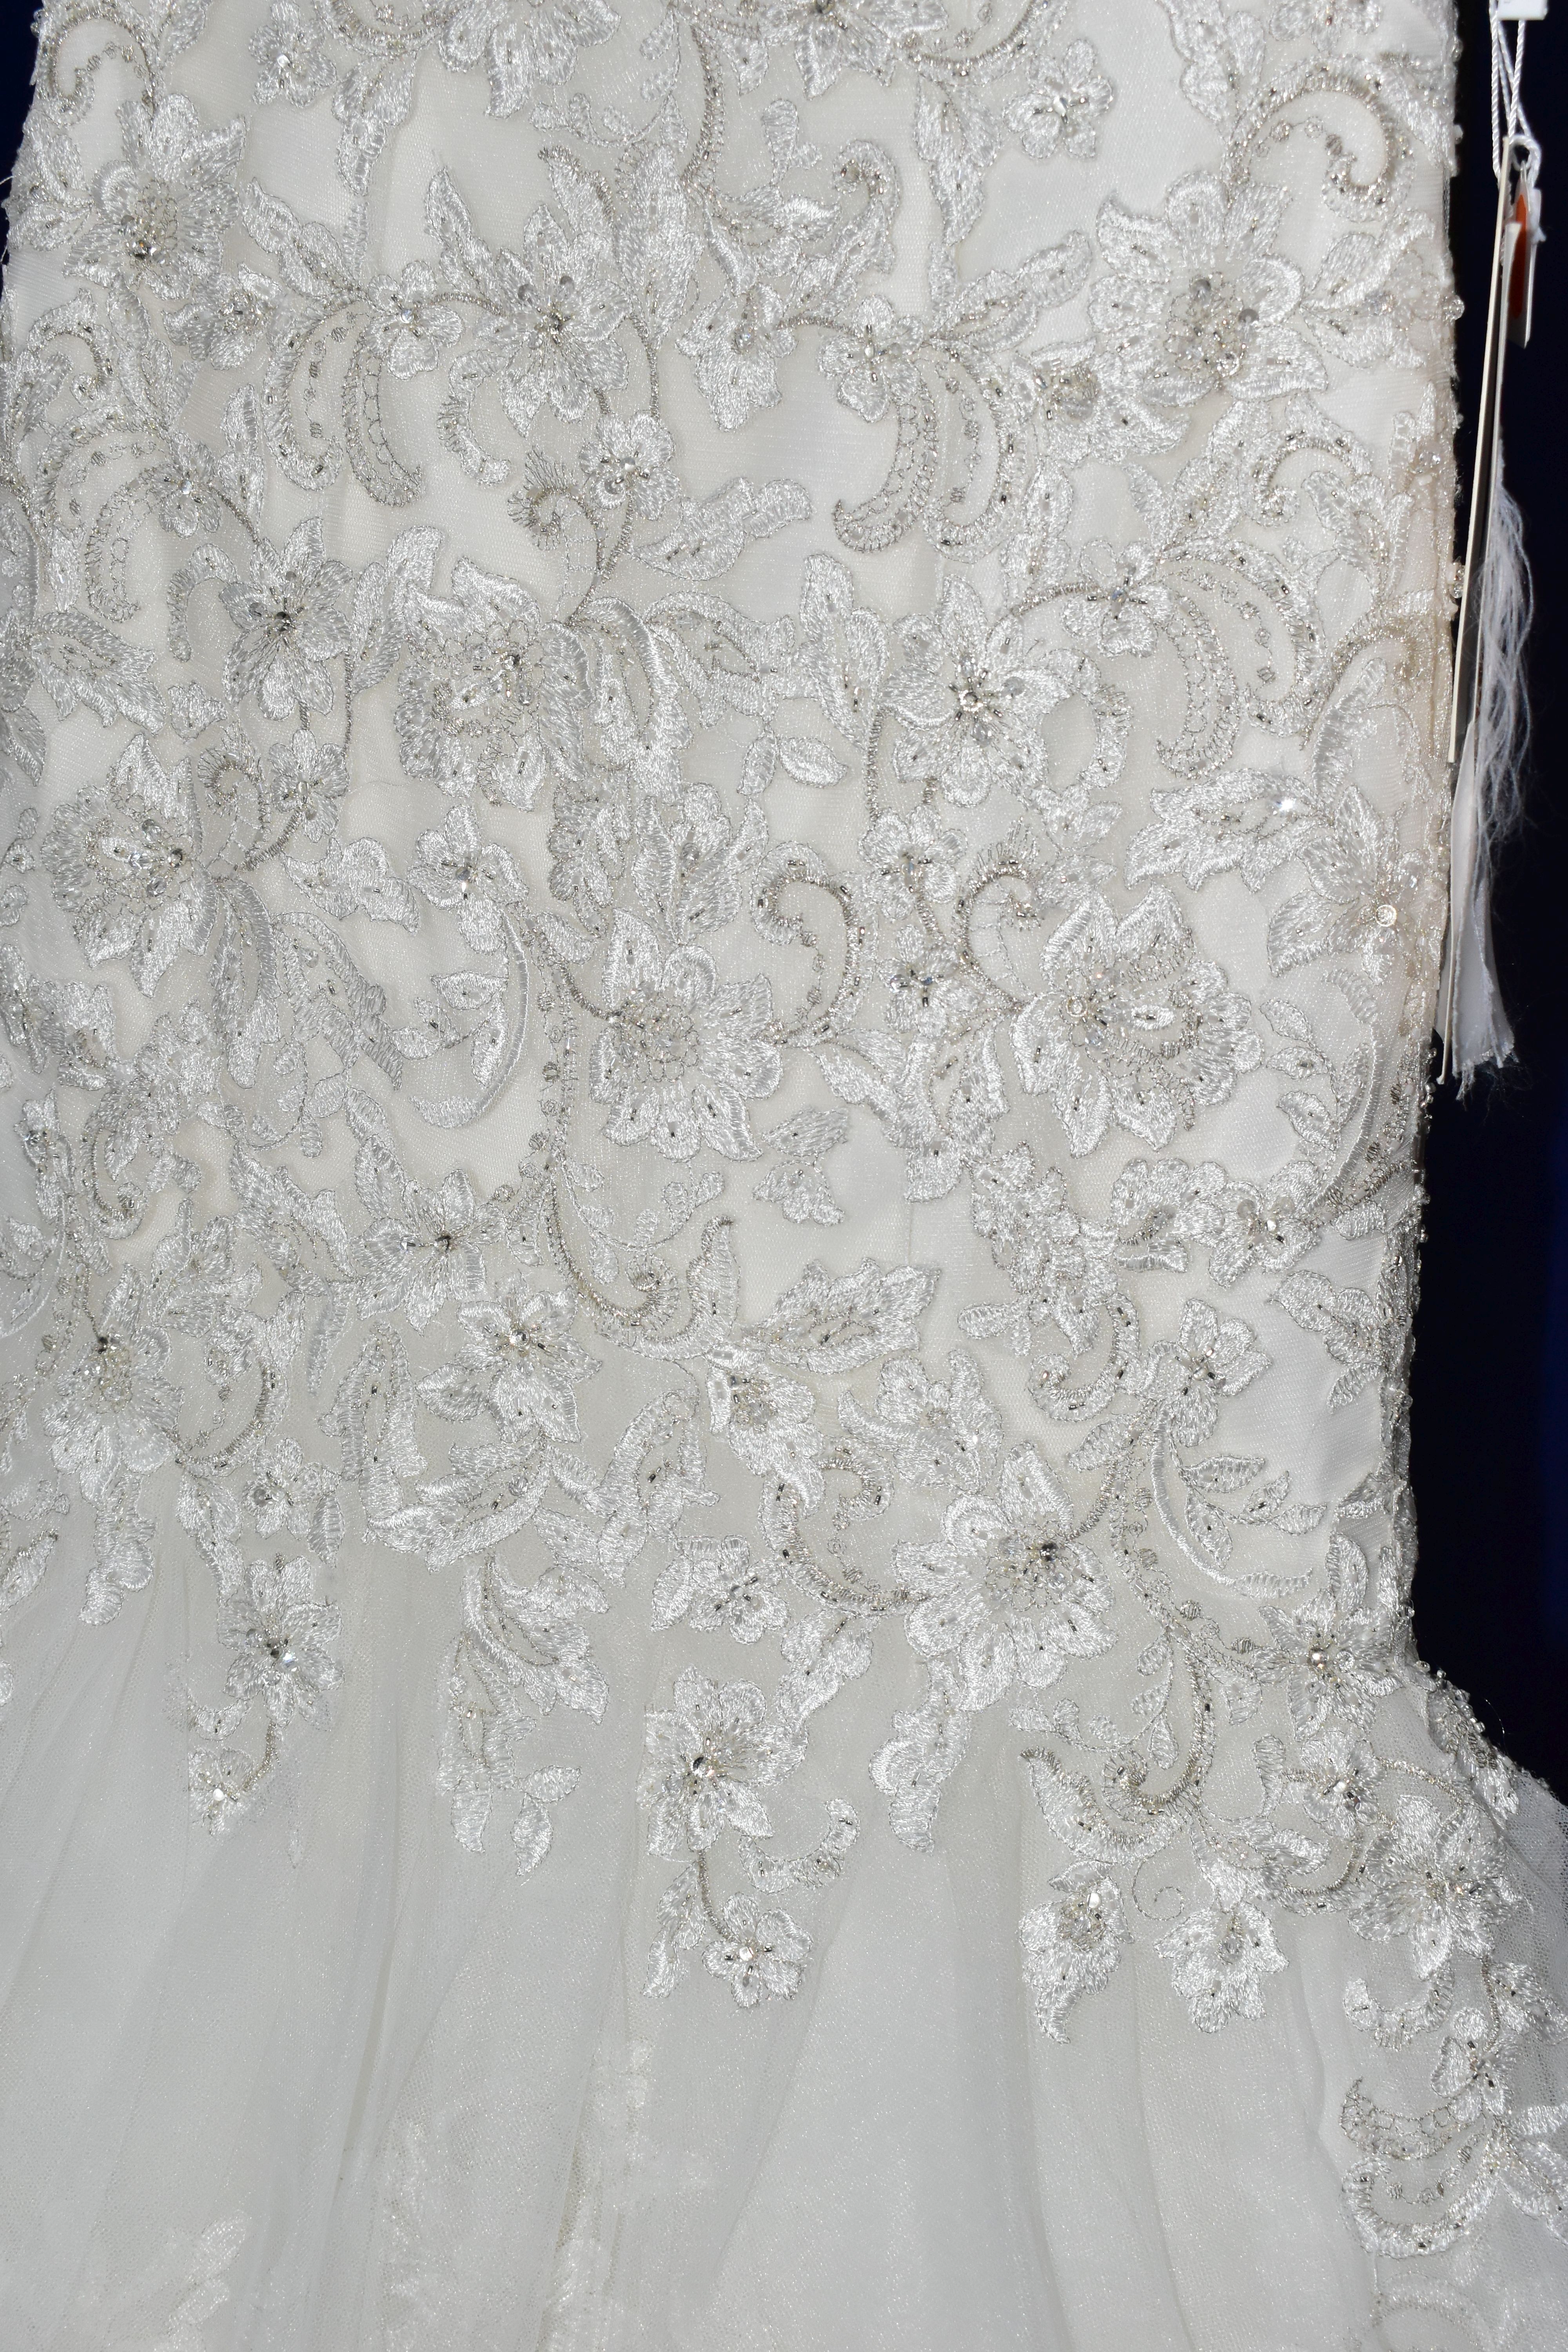 WEDDING DRESS, 'Sophia Tolli', ivory, size 6, beaded appliques, button detail along back, dropped - Image 5 of 16